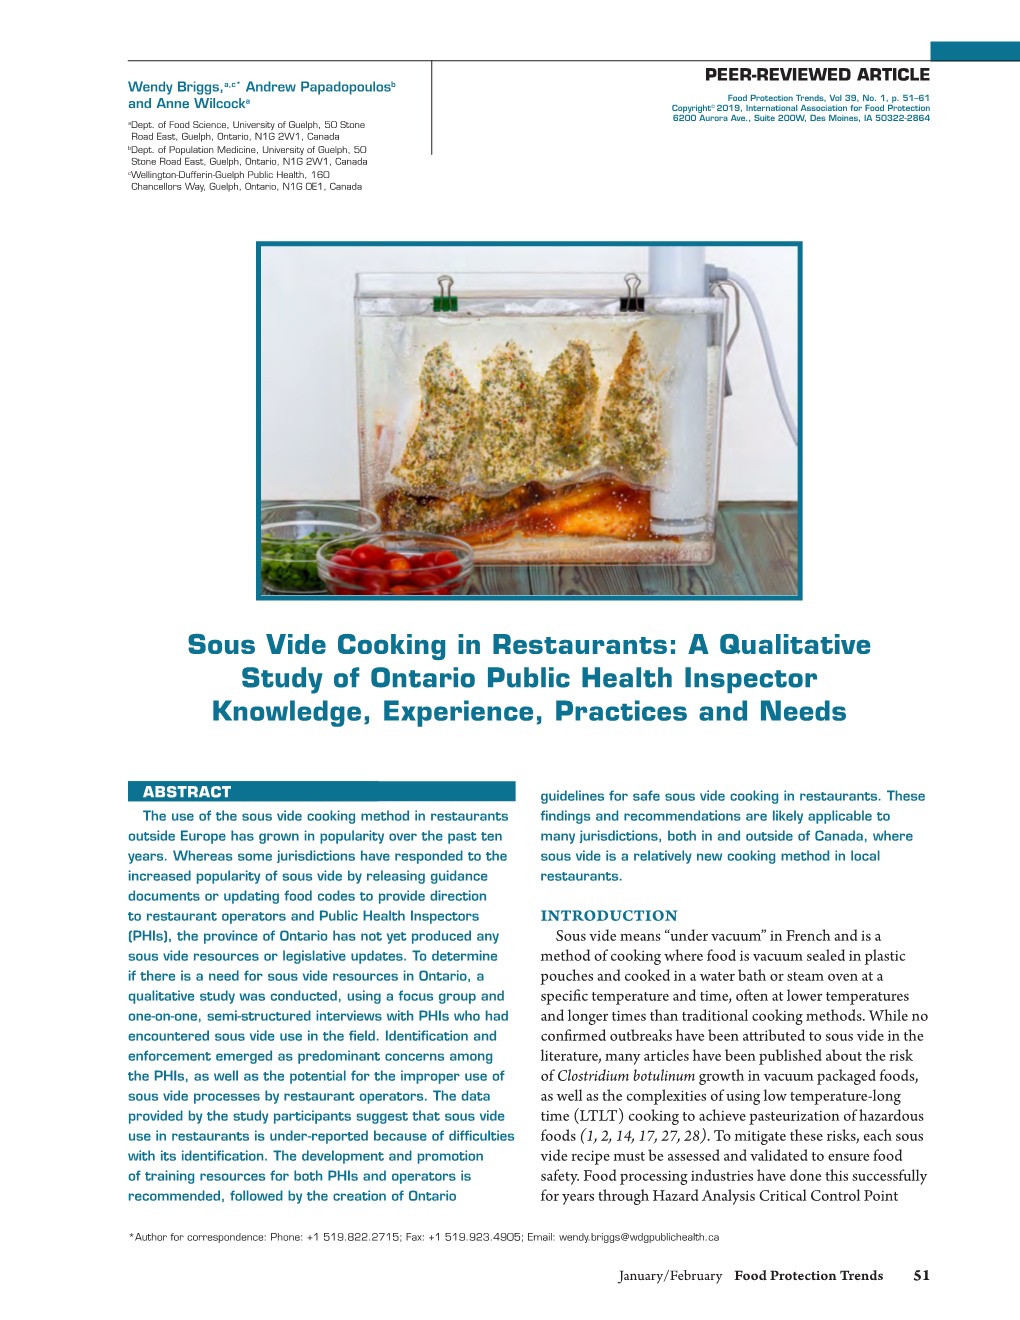 Sous Vide Cooking in Restaurants: a Qualitative Study of Ontario Public Health Inspector Knowledge, Experience, Practices and Needs